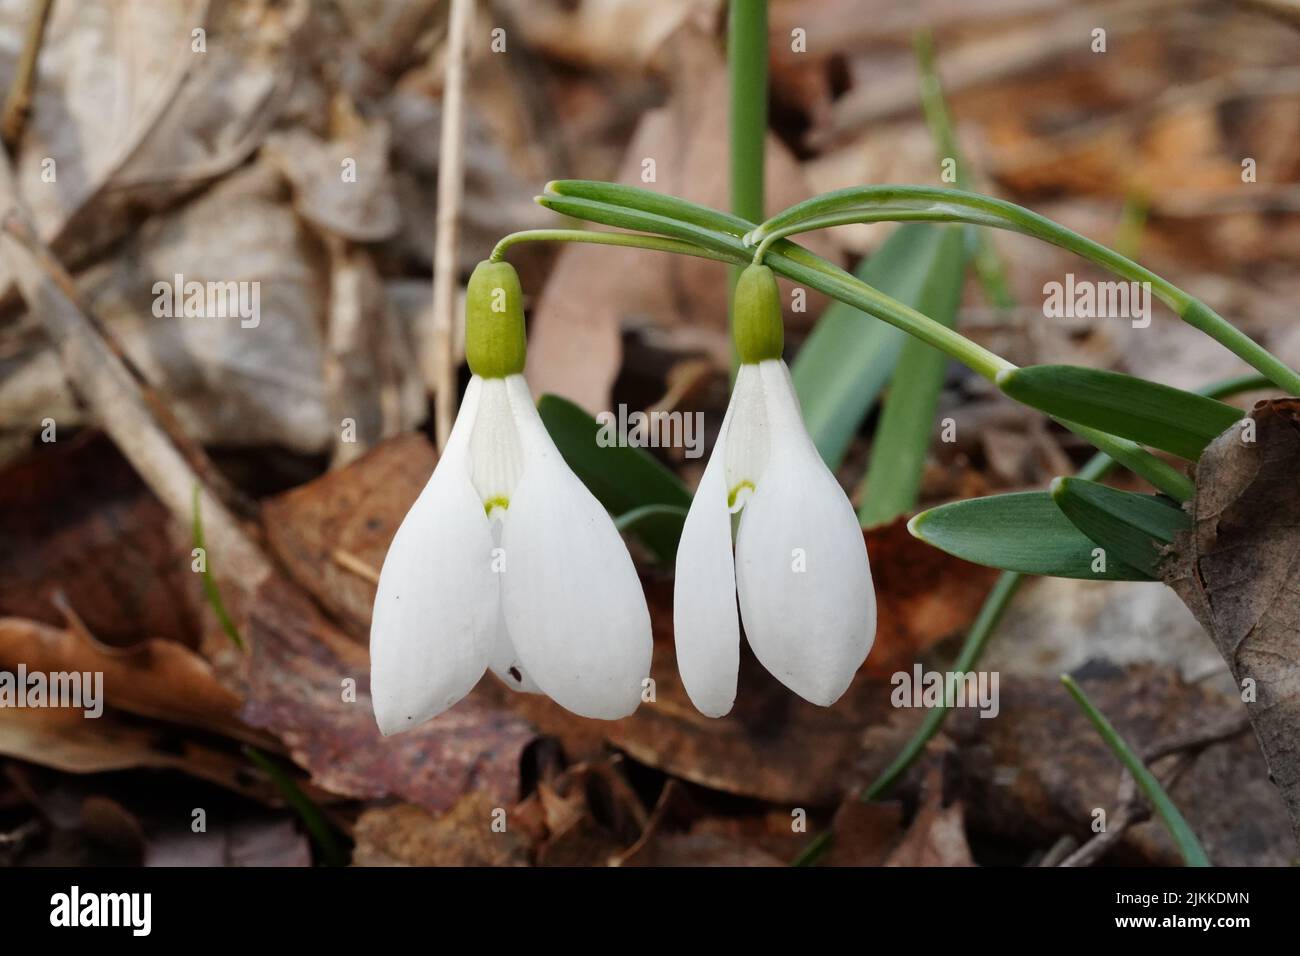 A closeup of white snowdrop flowers growing among fallen leaves in a forest Stock Photo